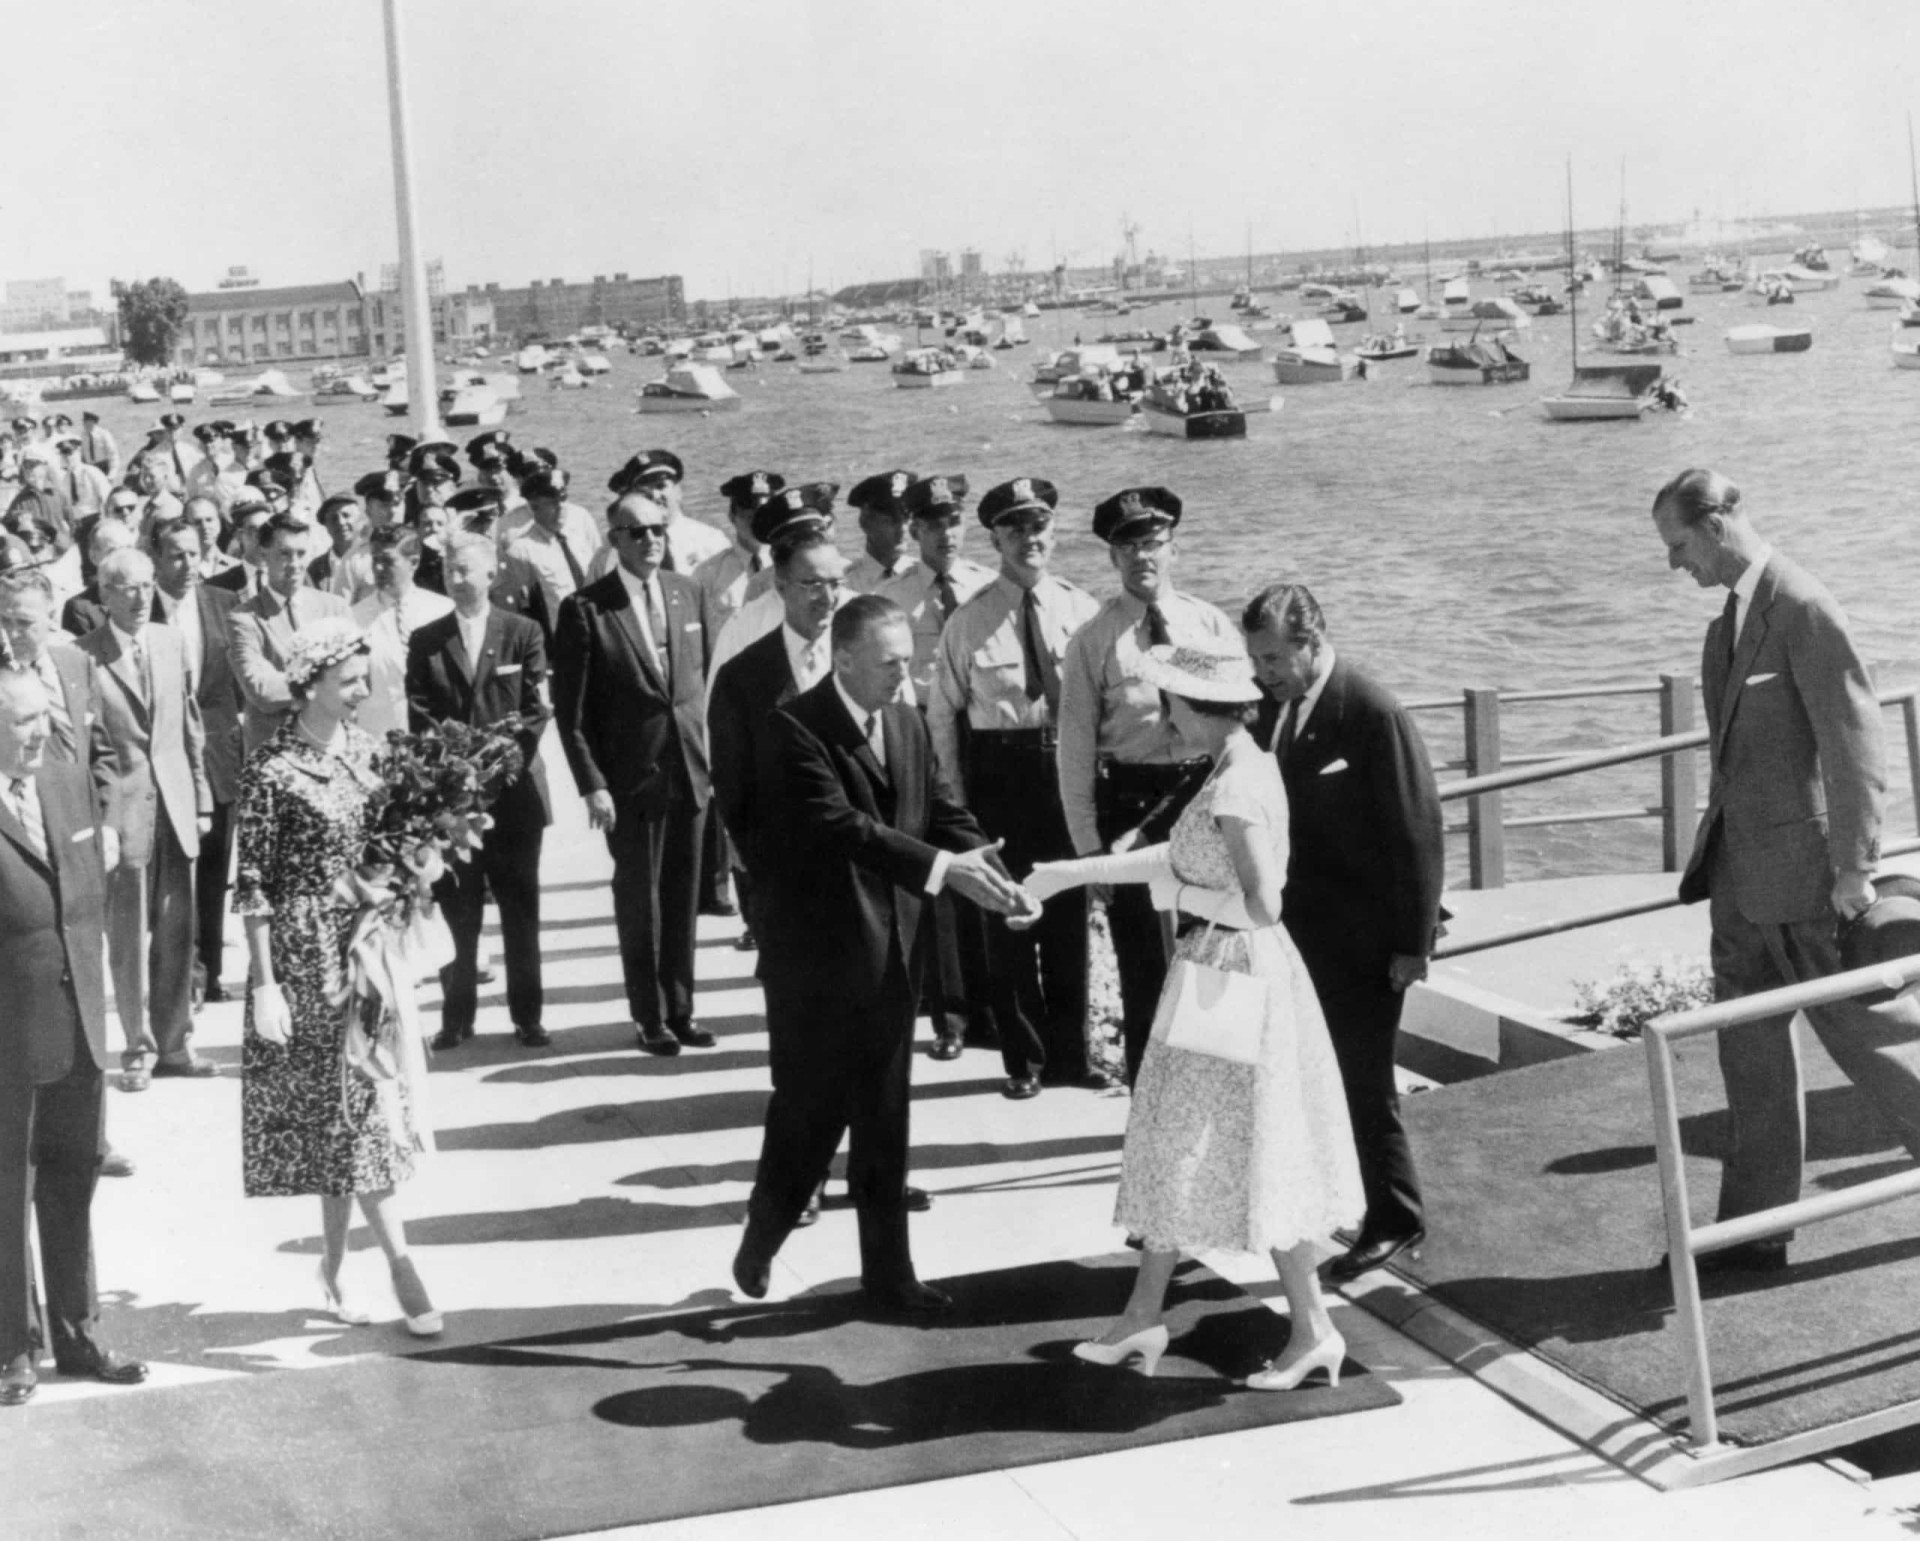 <p>Chicago's July 1959 royal welcome for the Queen and the Duke of Edinburgh was overwhelming. Some 6,000 vessels of all sizes jammed the harbor area to greet <em>Britannia</em> after having sailed the newly opened St. Lawrence Seaway. Queen Elizabeth, the first British monarch to visit Chicago, is pictured being welcomed by Illinois Governor William Straton. US President Dwight D. Eisenhower had been a guest during part of the voyage, having been invited to take part in the opening ceremony of the St. Lawrence Seaway.</p><p><a href="https://www.msn.com/en-sg/community/channel/vid-7xx8mnucu55yw63we9va2gwr7uihbxwc68fxqp25x6tg4ftibpra?cvid=94631541bc0f4f89bfd59158d696ad7e">Follow us and access great exclusive content every day</a></p>